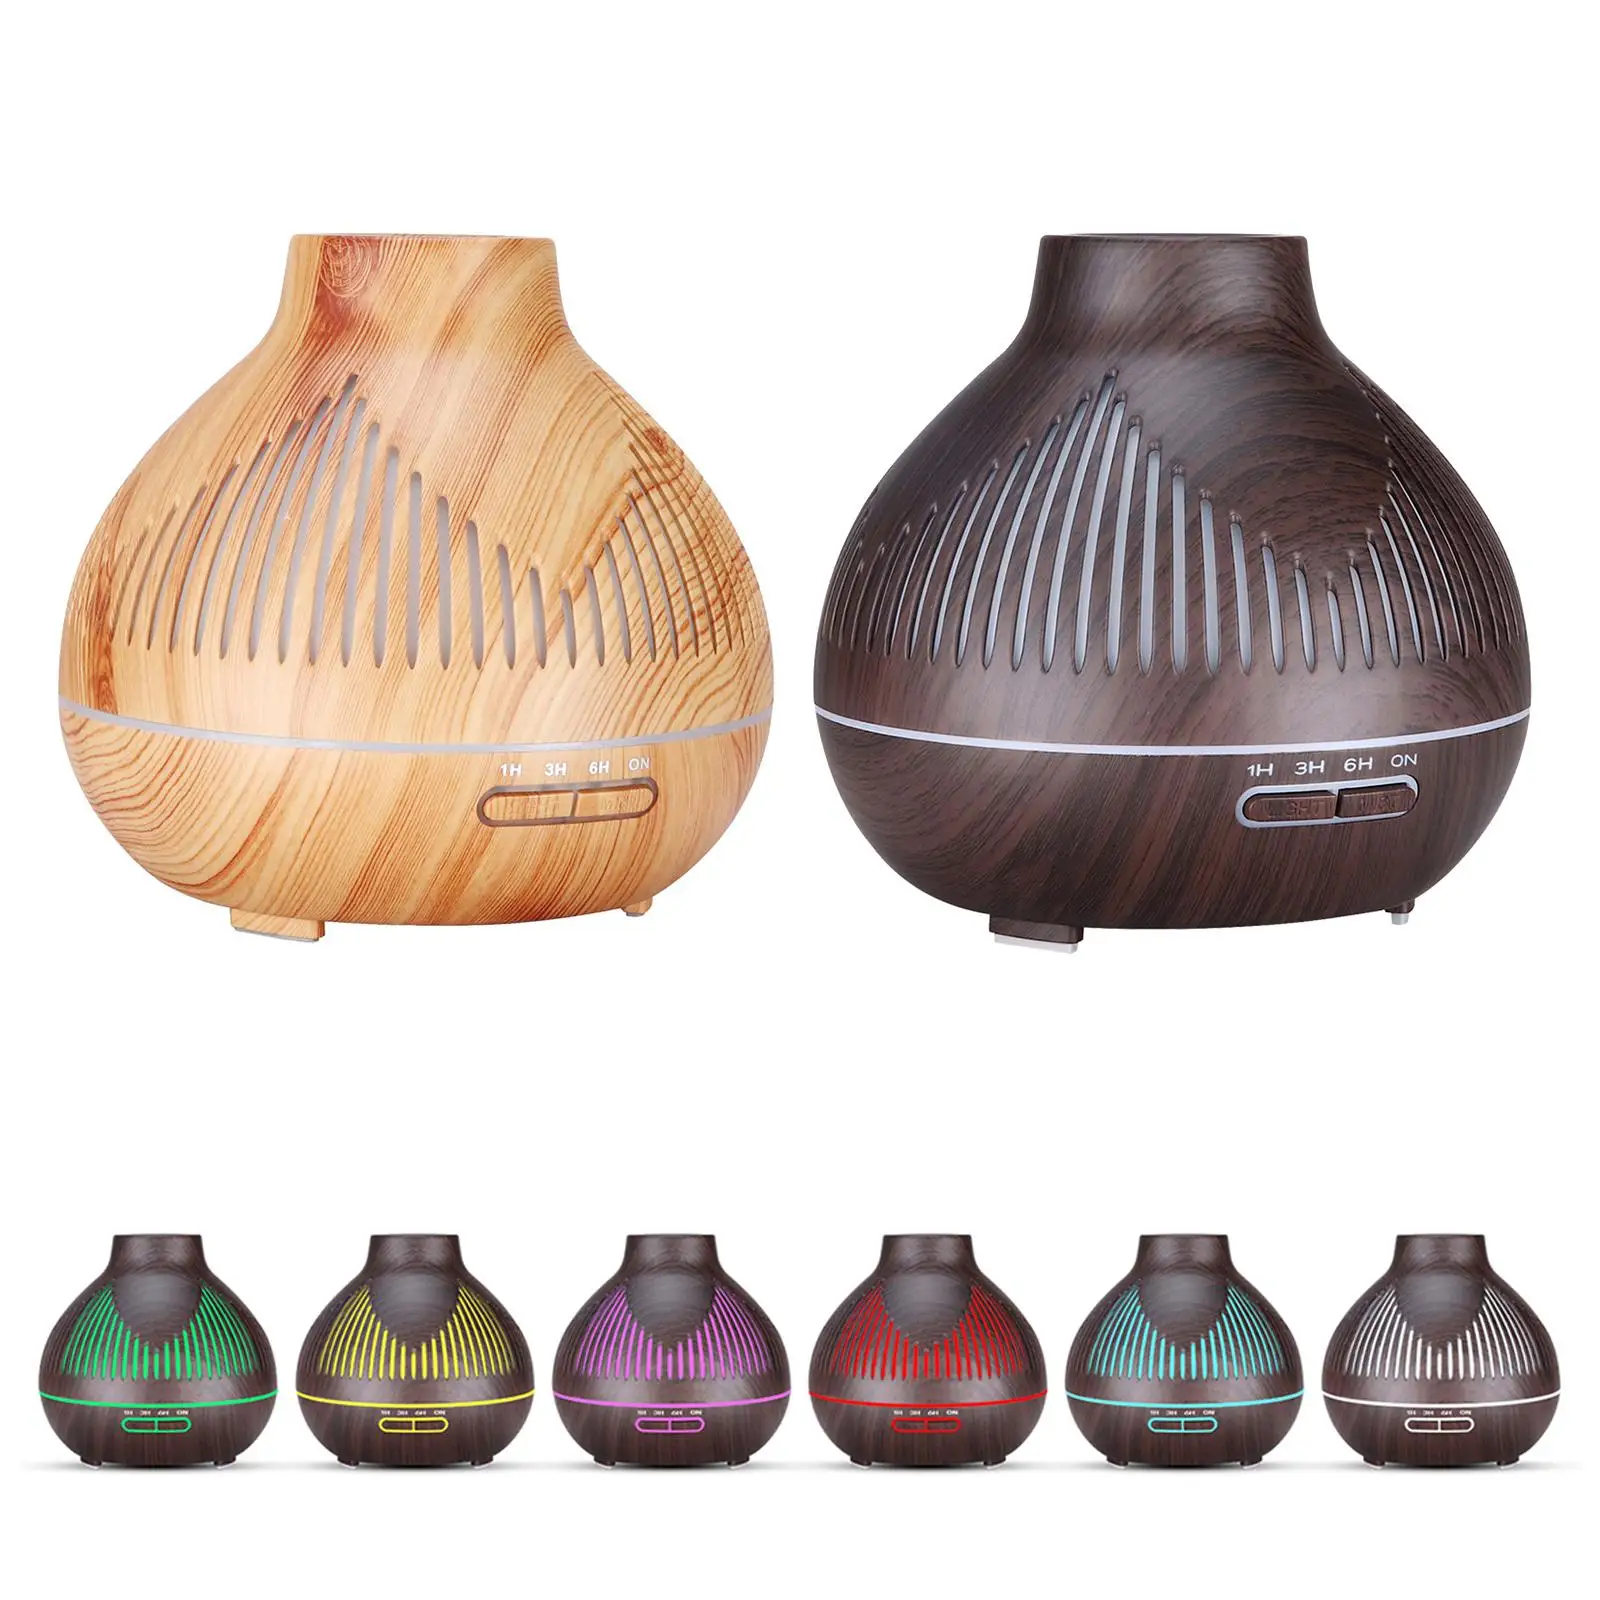 

400ml Air Humidifier Mini Aromatherapy Diffuser ,Wood Grain, Timer Silent Cool Mist for Office Desktop Car Baby Room Living Room